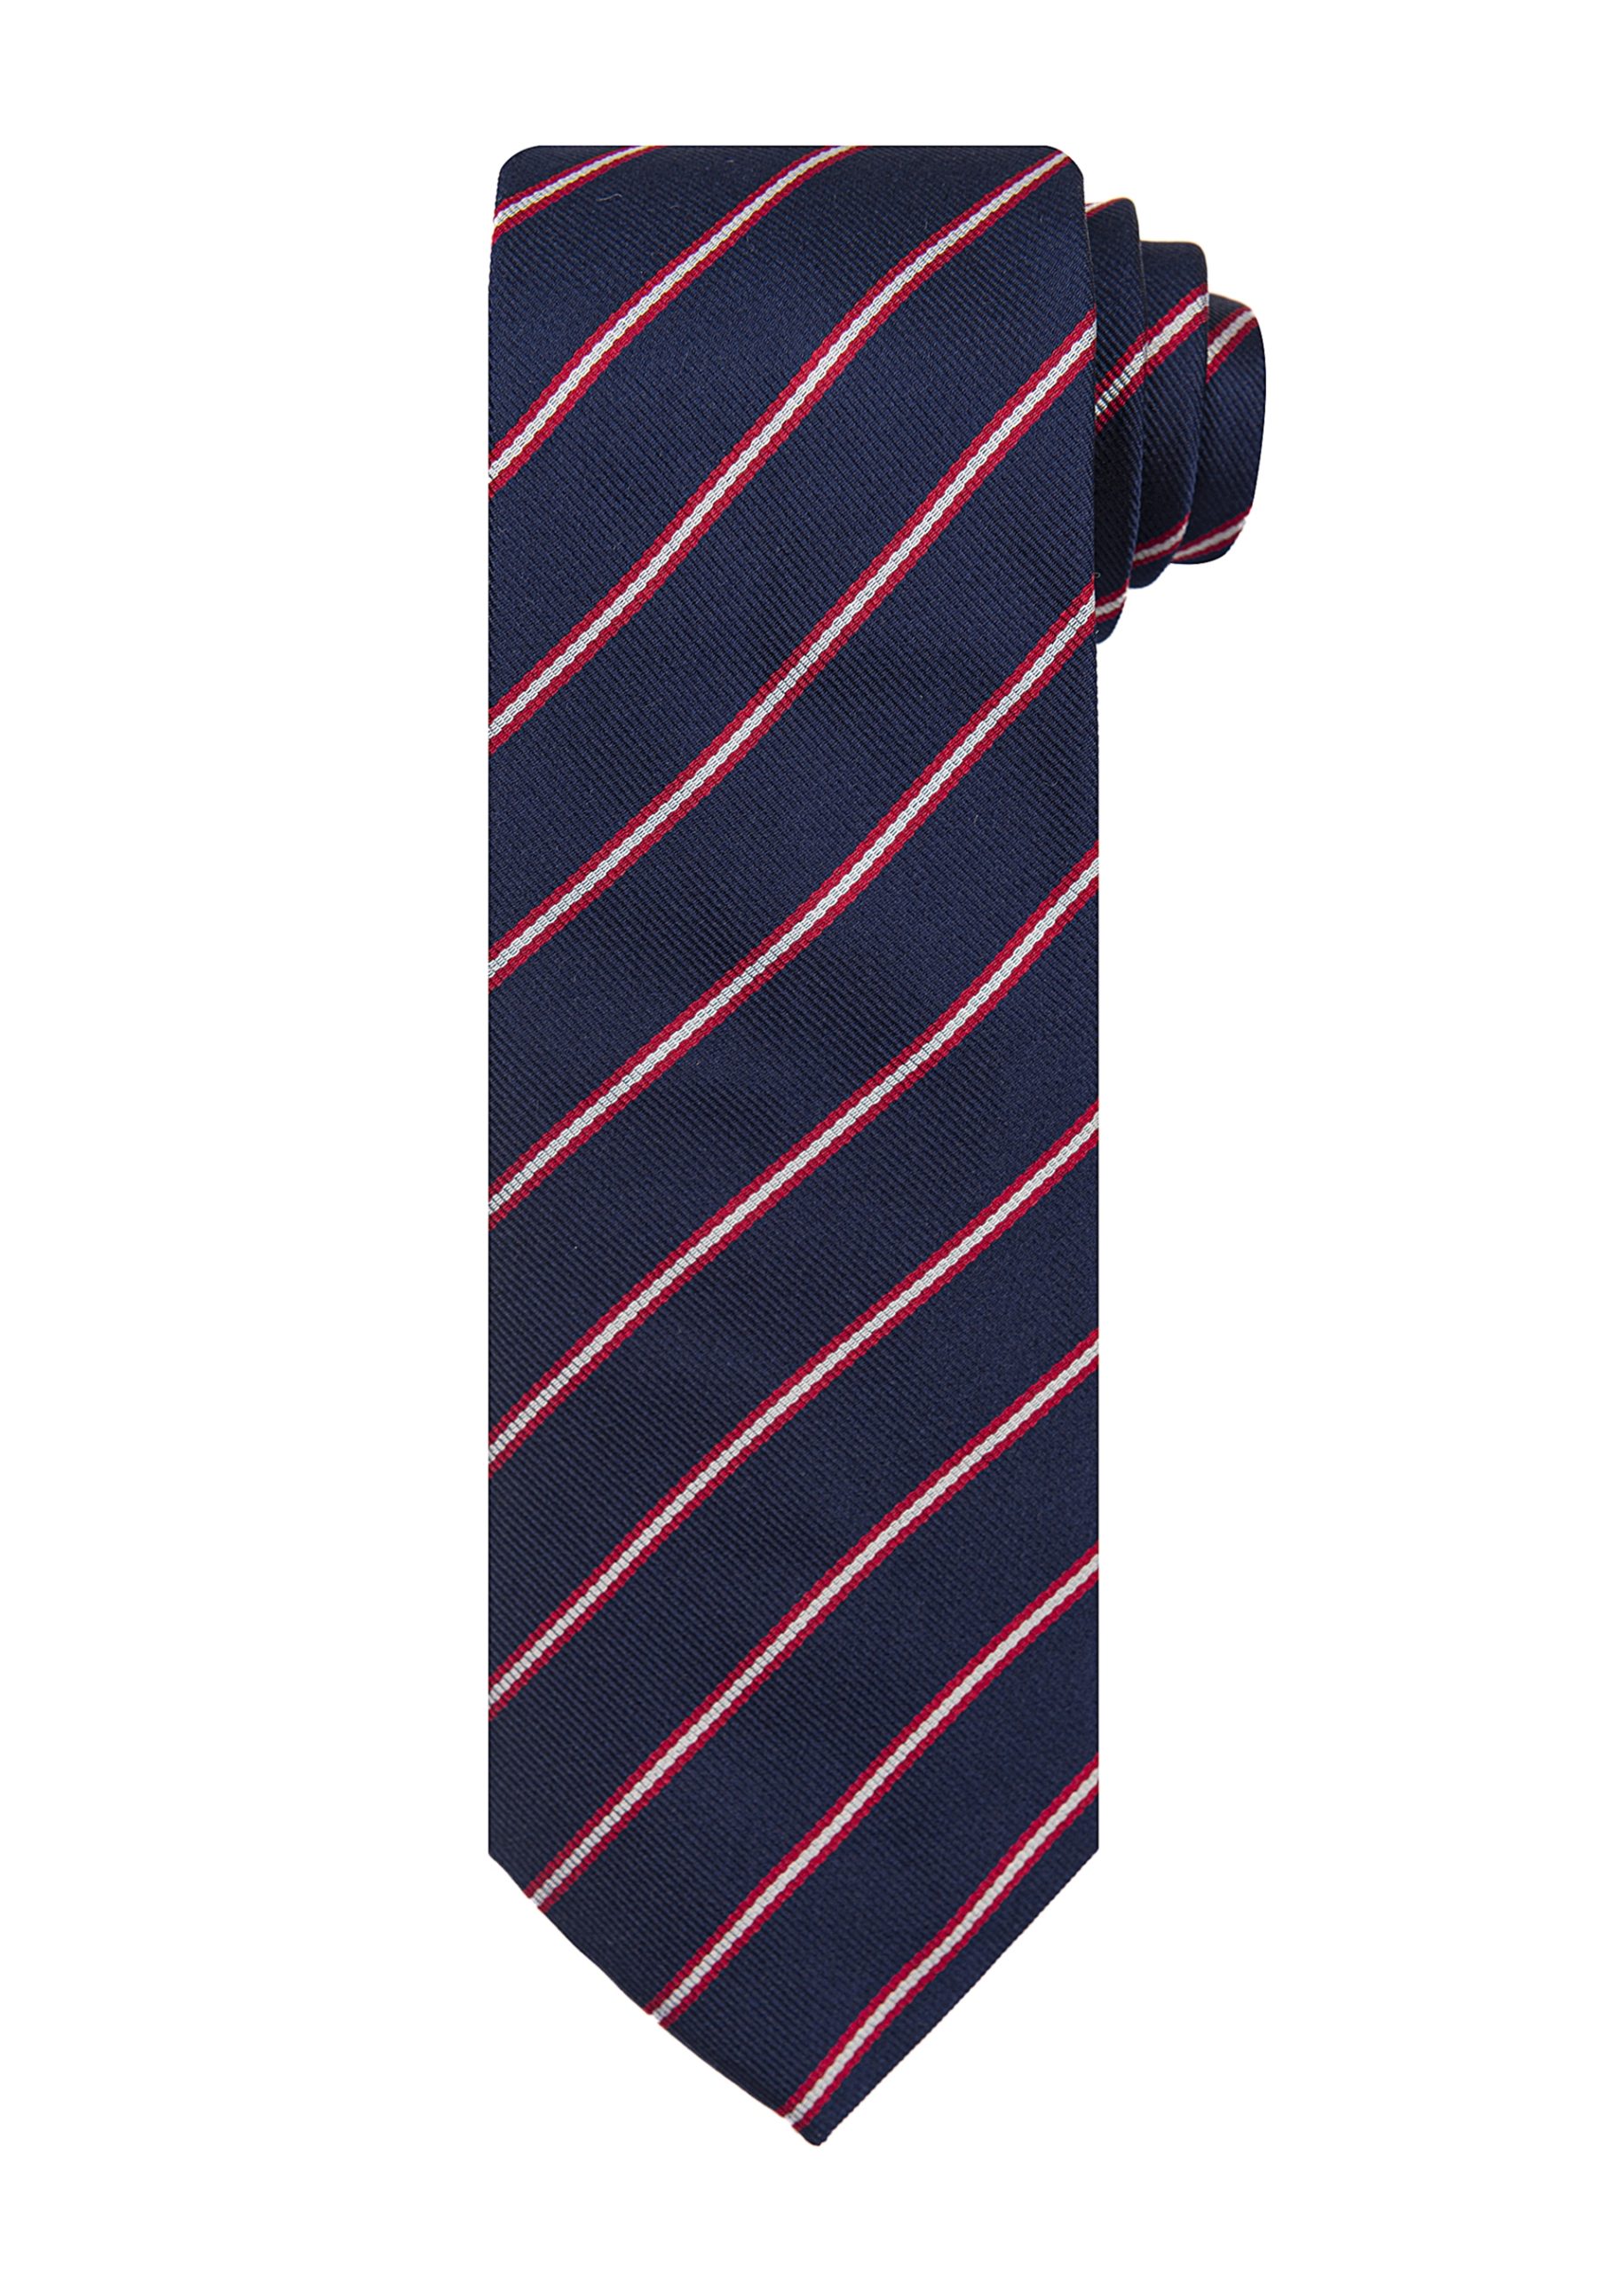 London tie silk red and navy